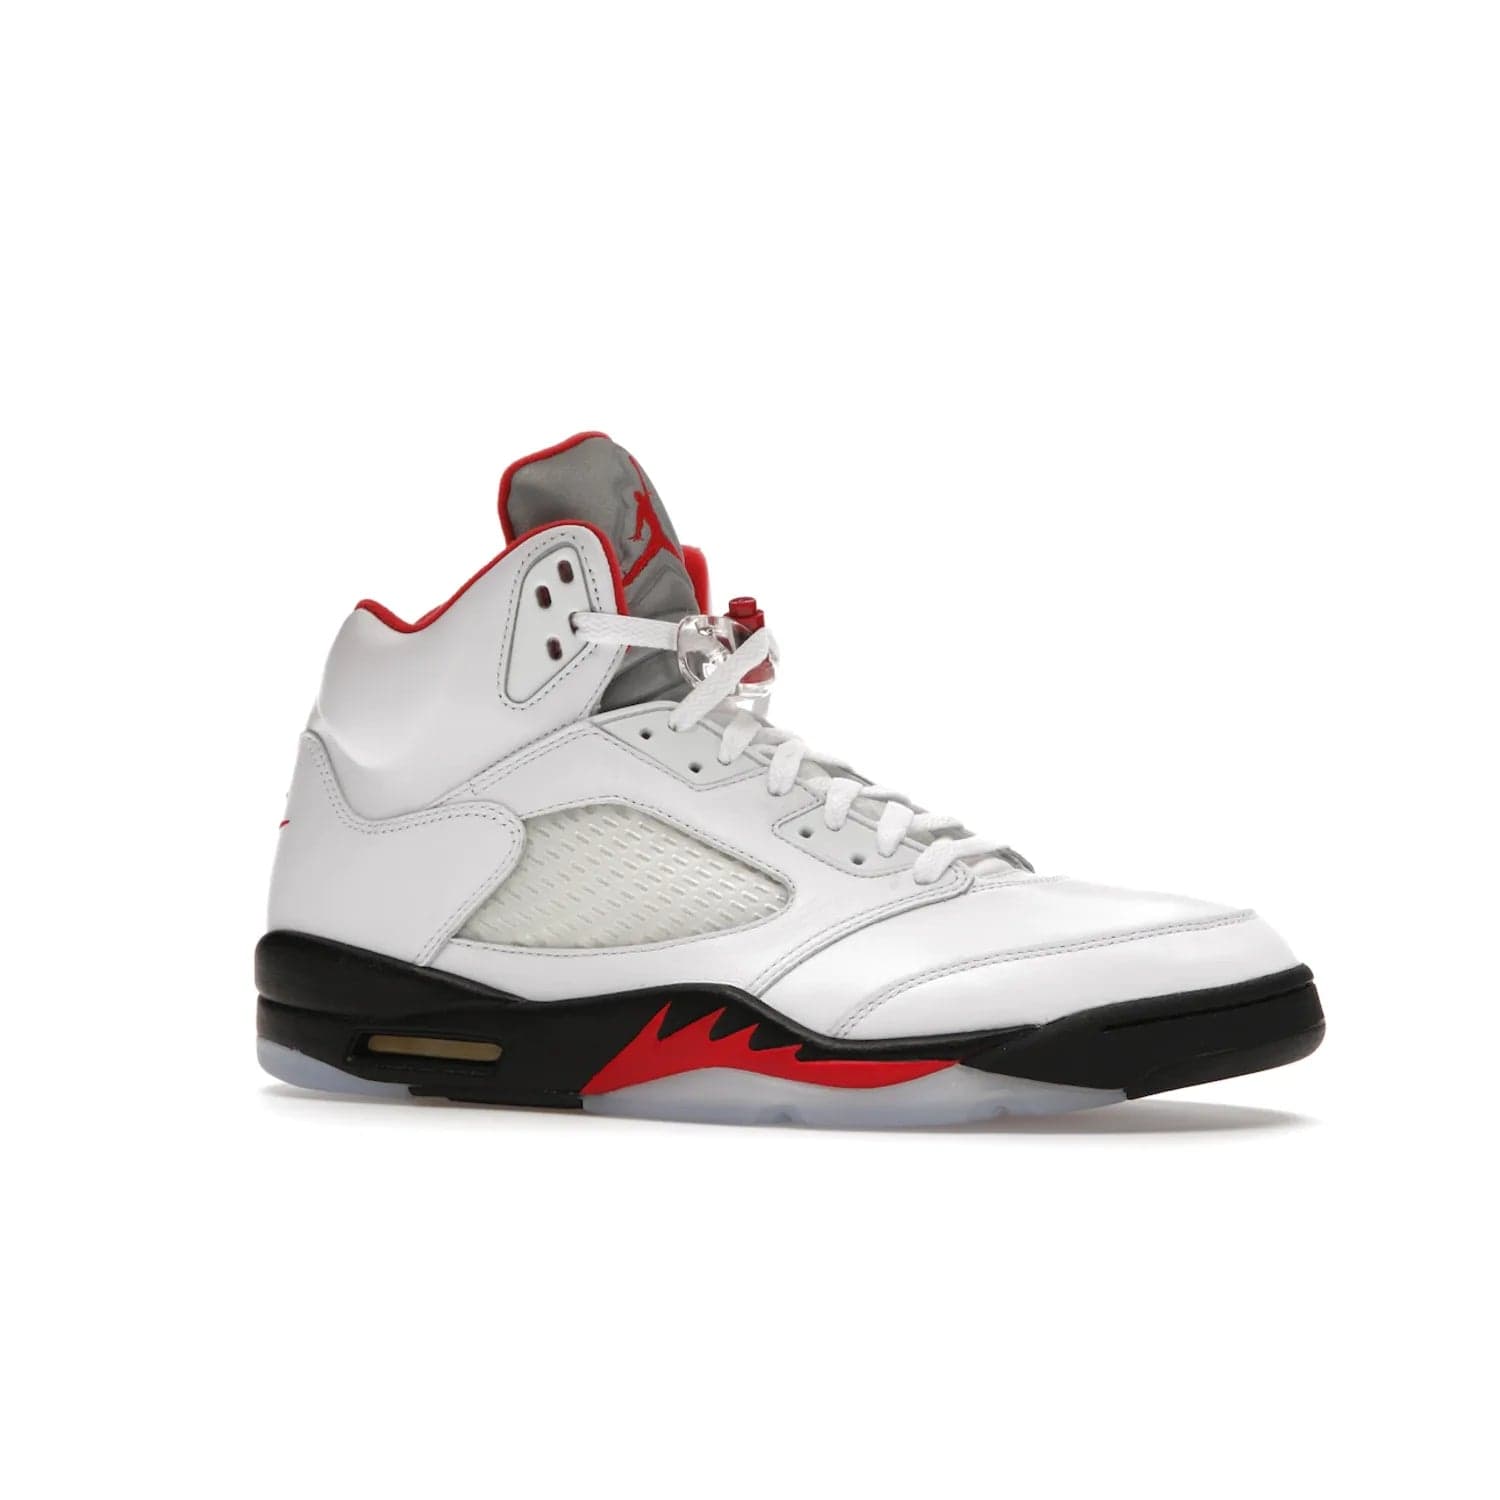 Jordan 5 Retro Fire Red Silver Tongue (2020) - Image 3 - Only at www.BallersClubKickz.com - Experience classic styling with the Jordan 5 Retro Fire Red Silver Tongue (2020). Features a white leather upper, 3M reflective tongue, midsole colorblocking, and an icy translucent outsole. Now available, upgrade your shoe collection today.